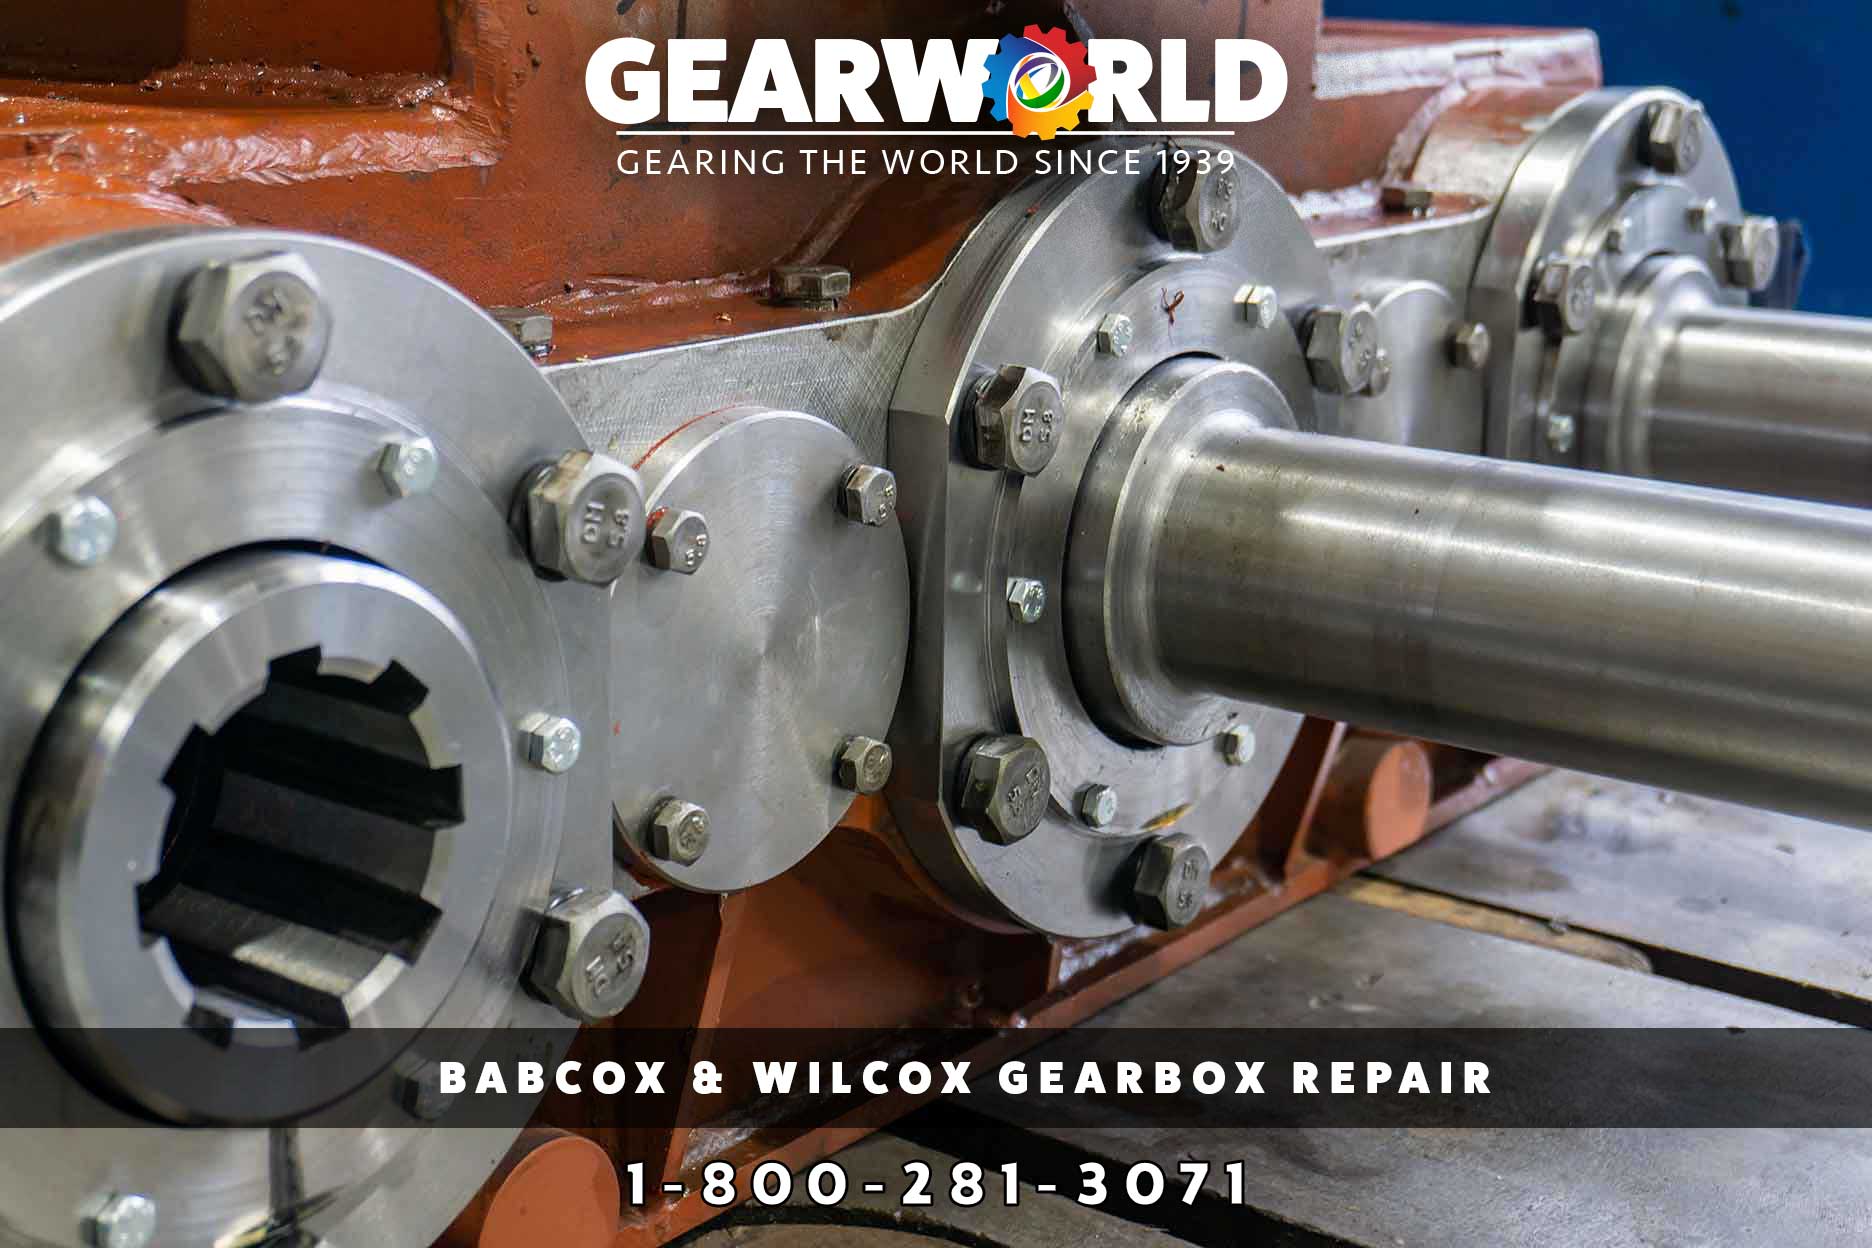 Babcox and Wilcox Gearbox Repair